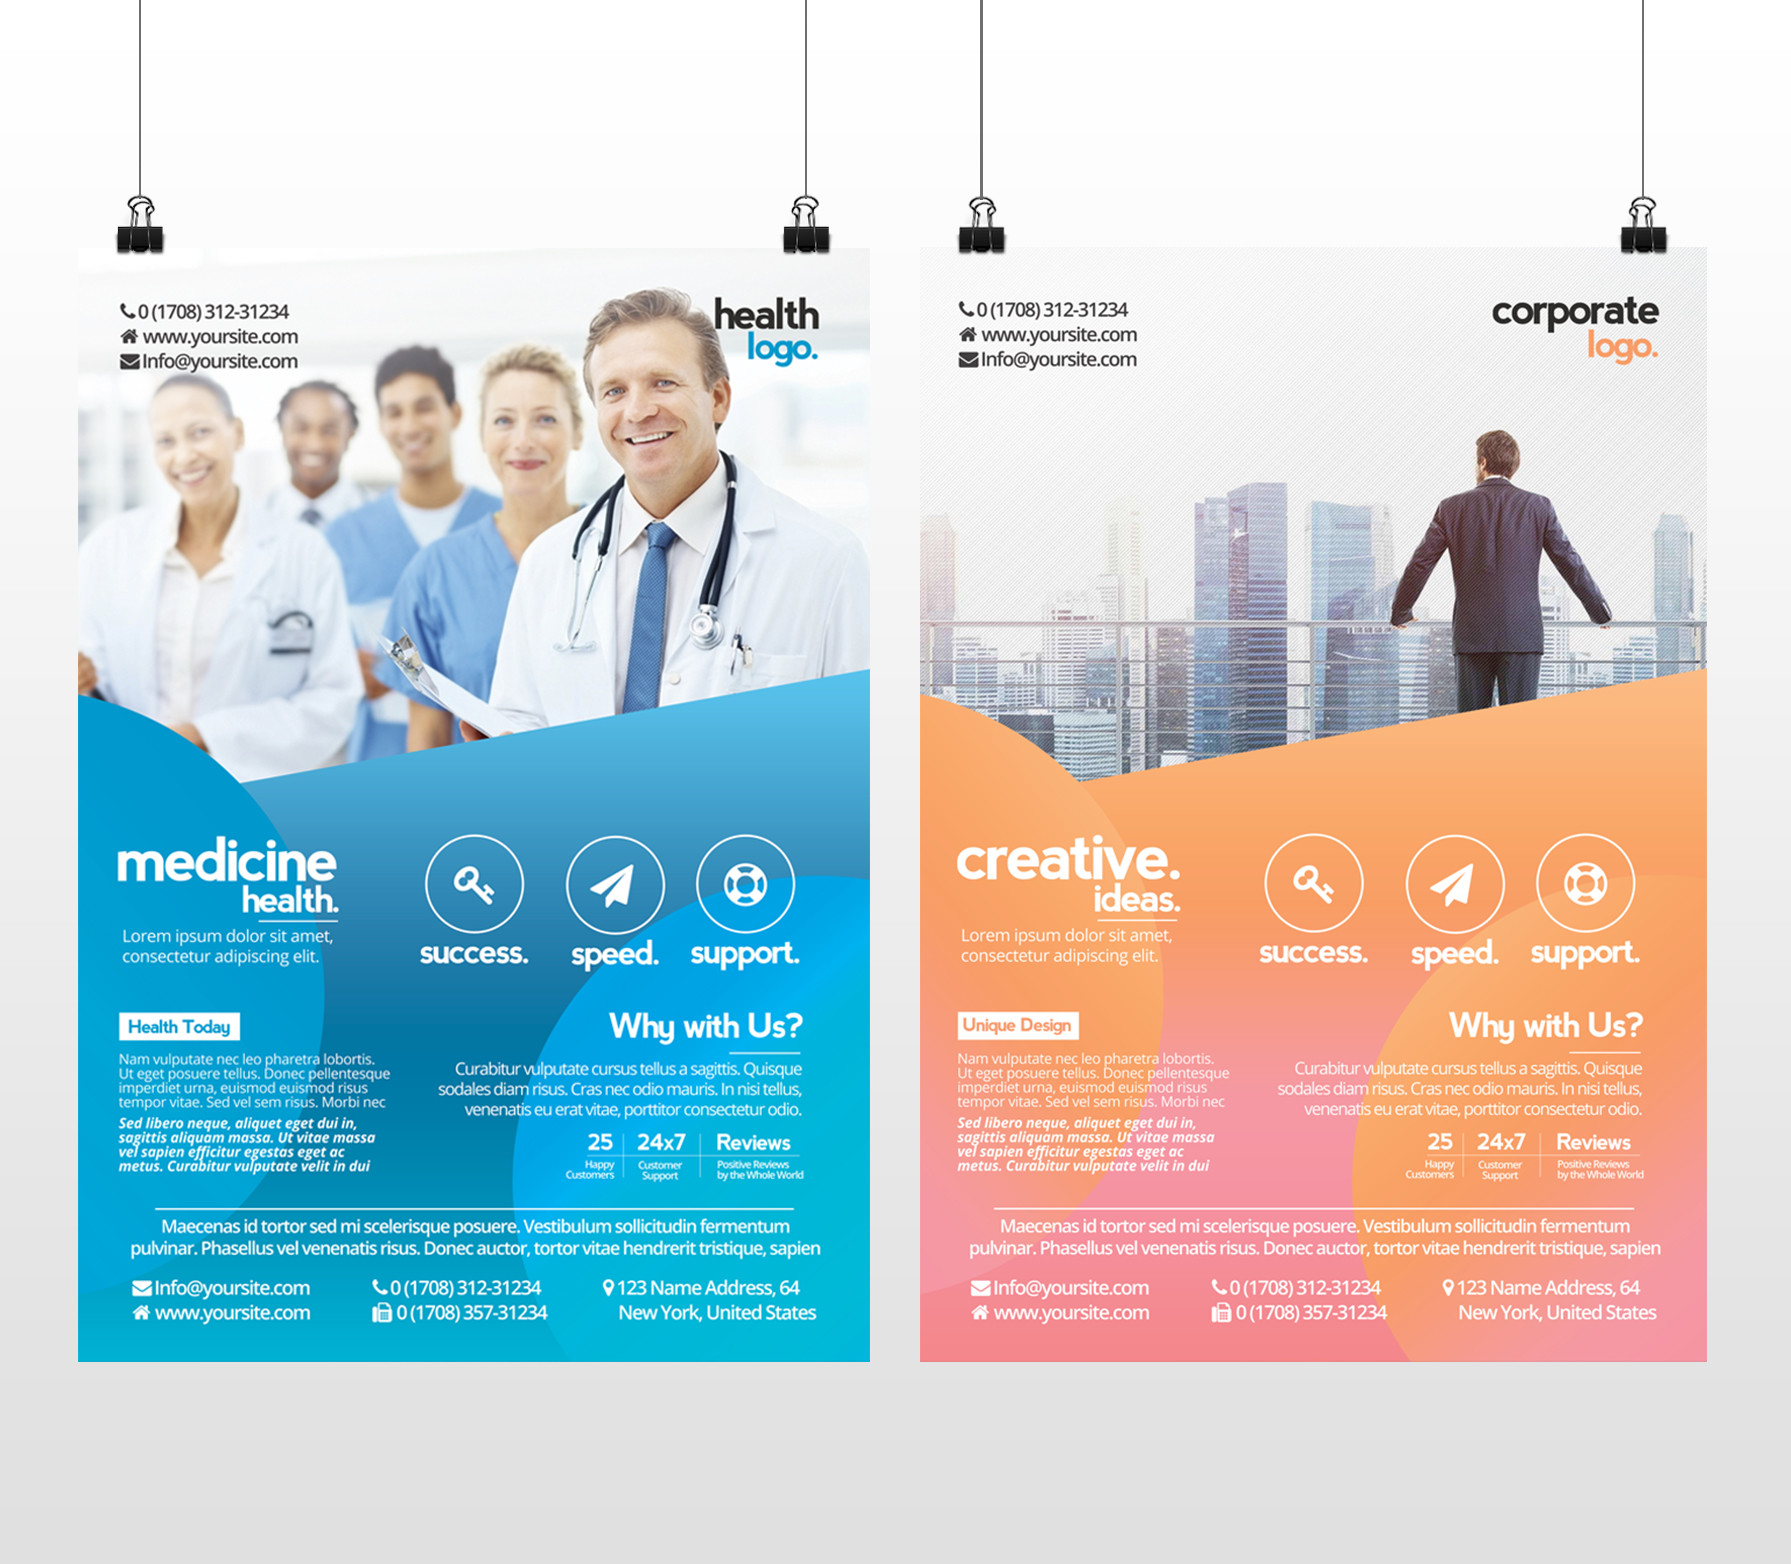 Design Tips in Designing Professional Flyers